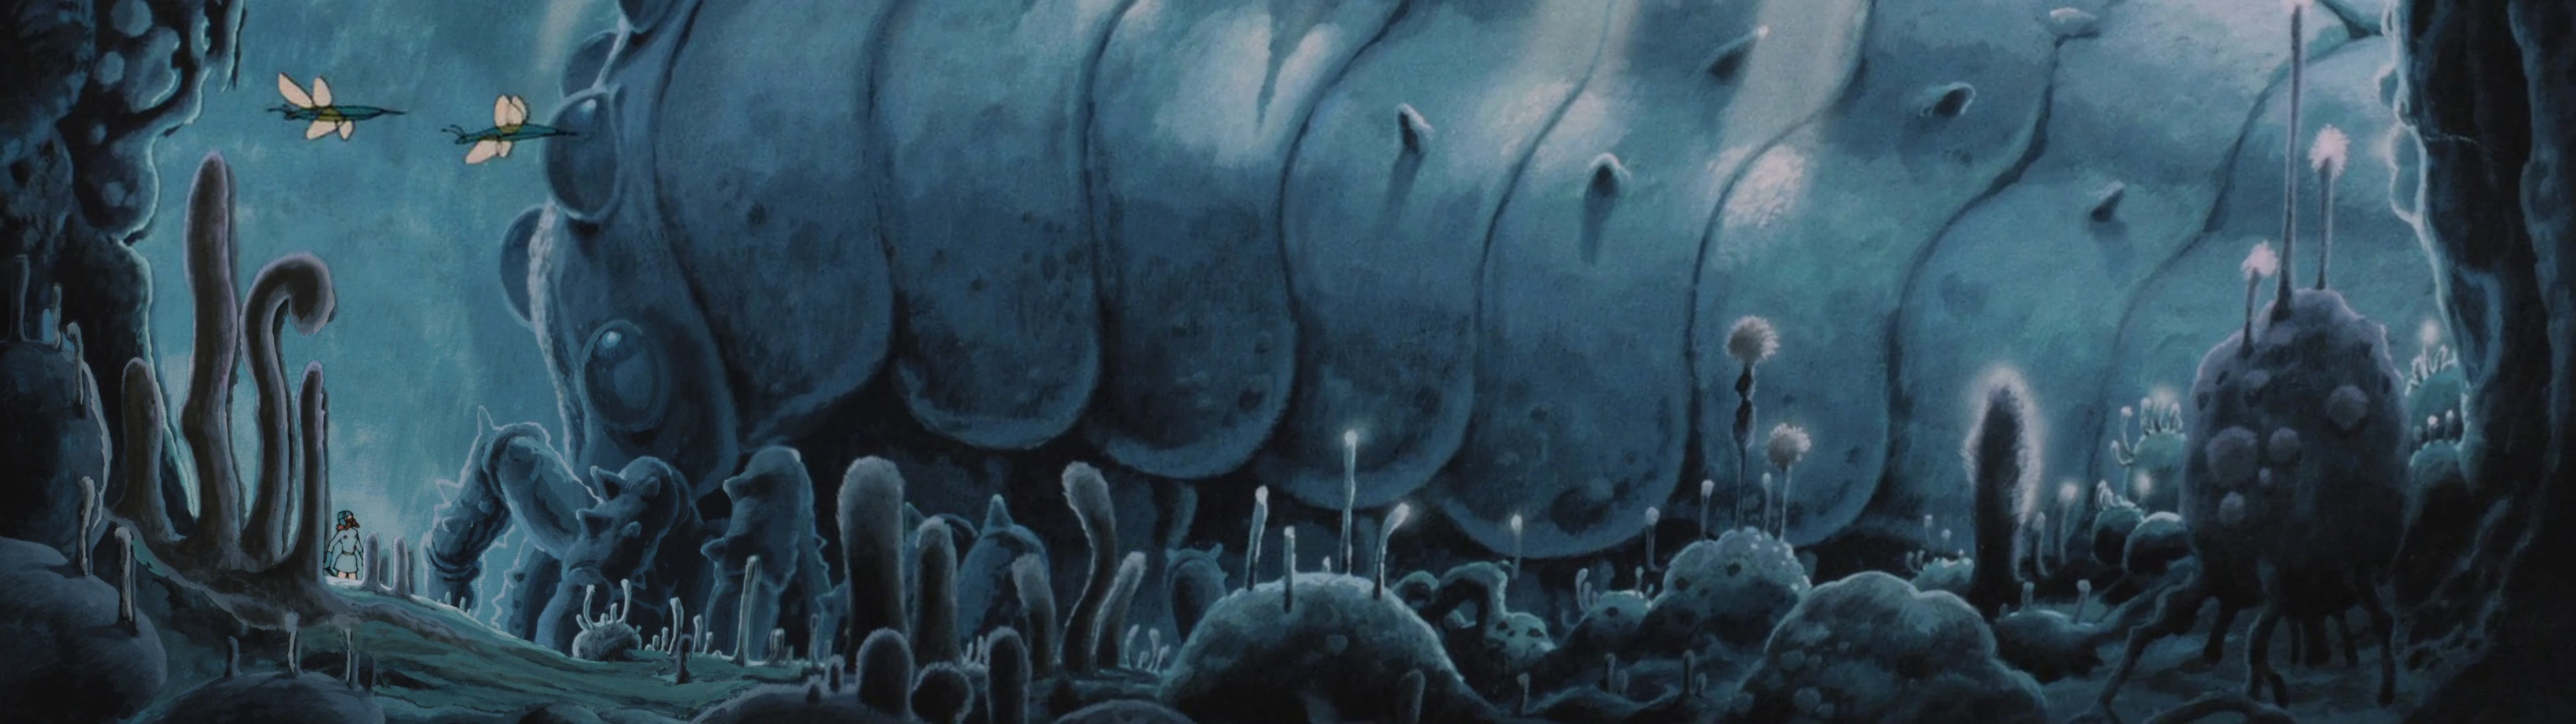 Awesome Nausicaä of the Valley of the Wind Image